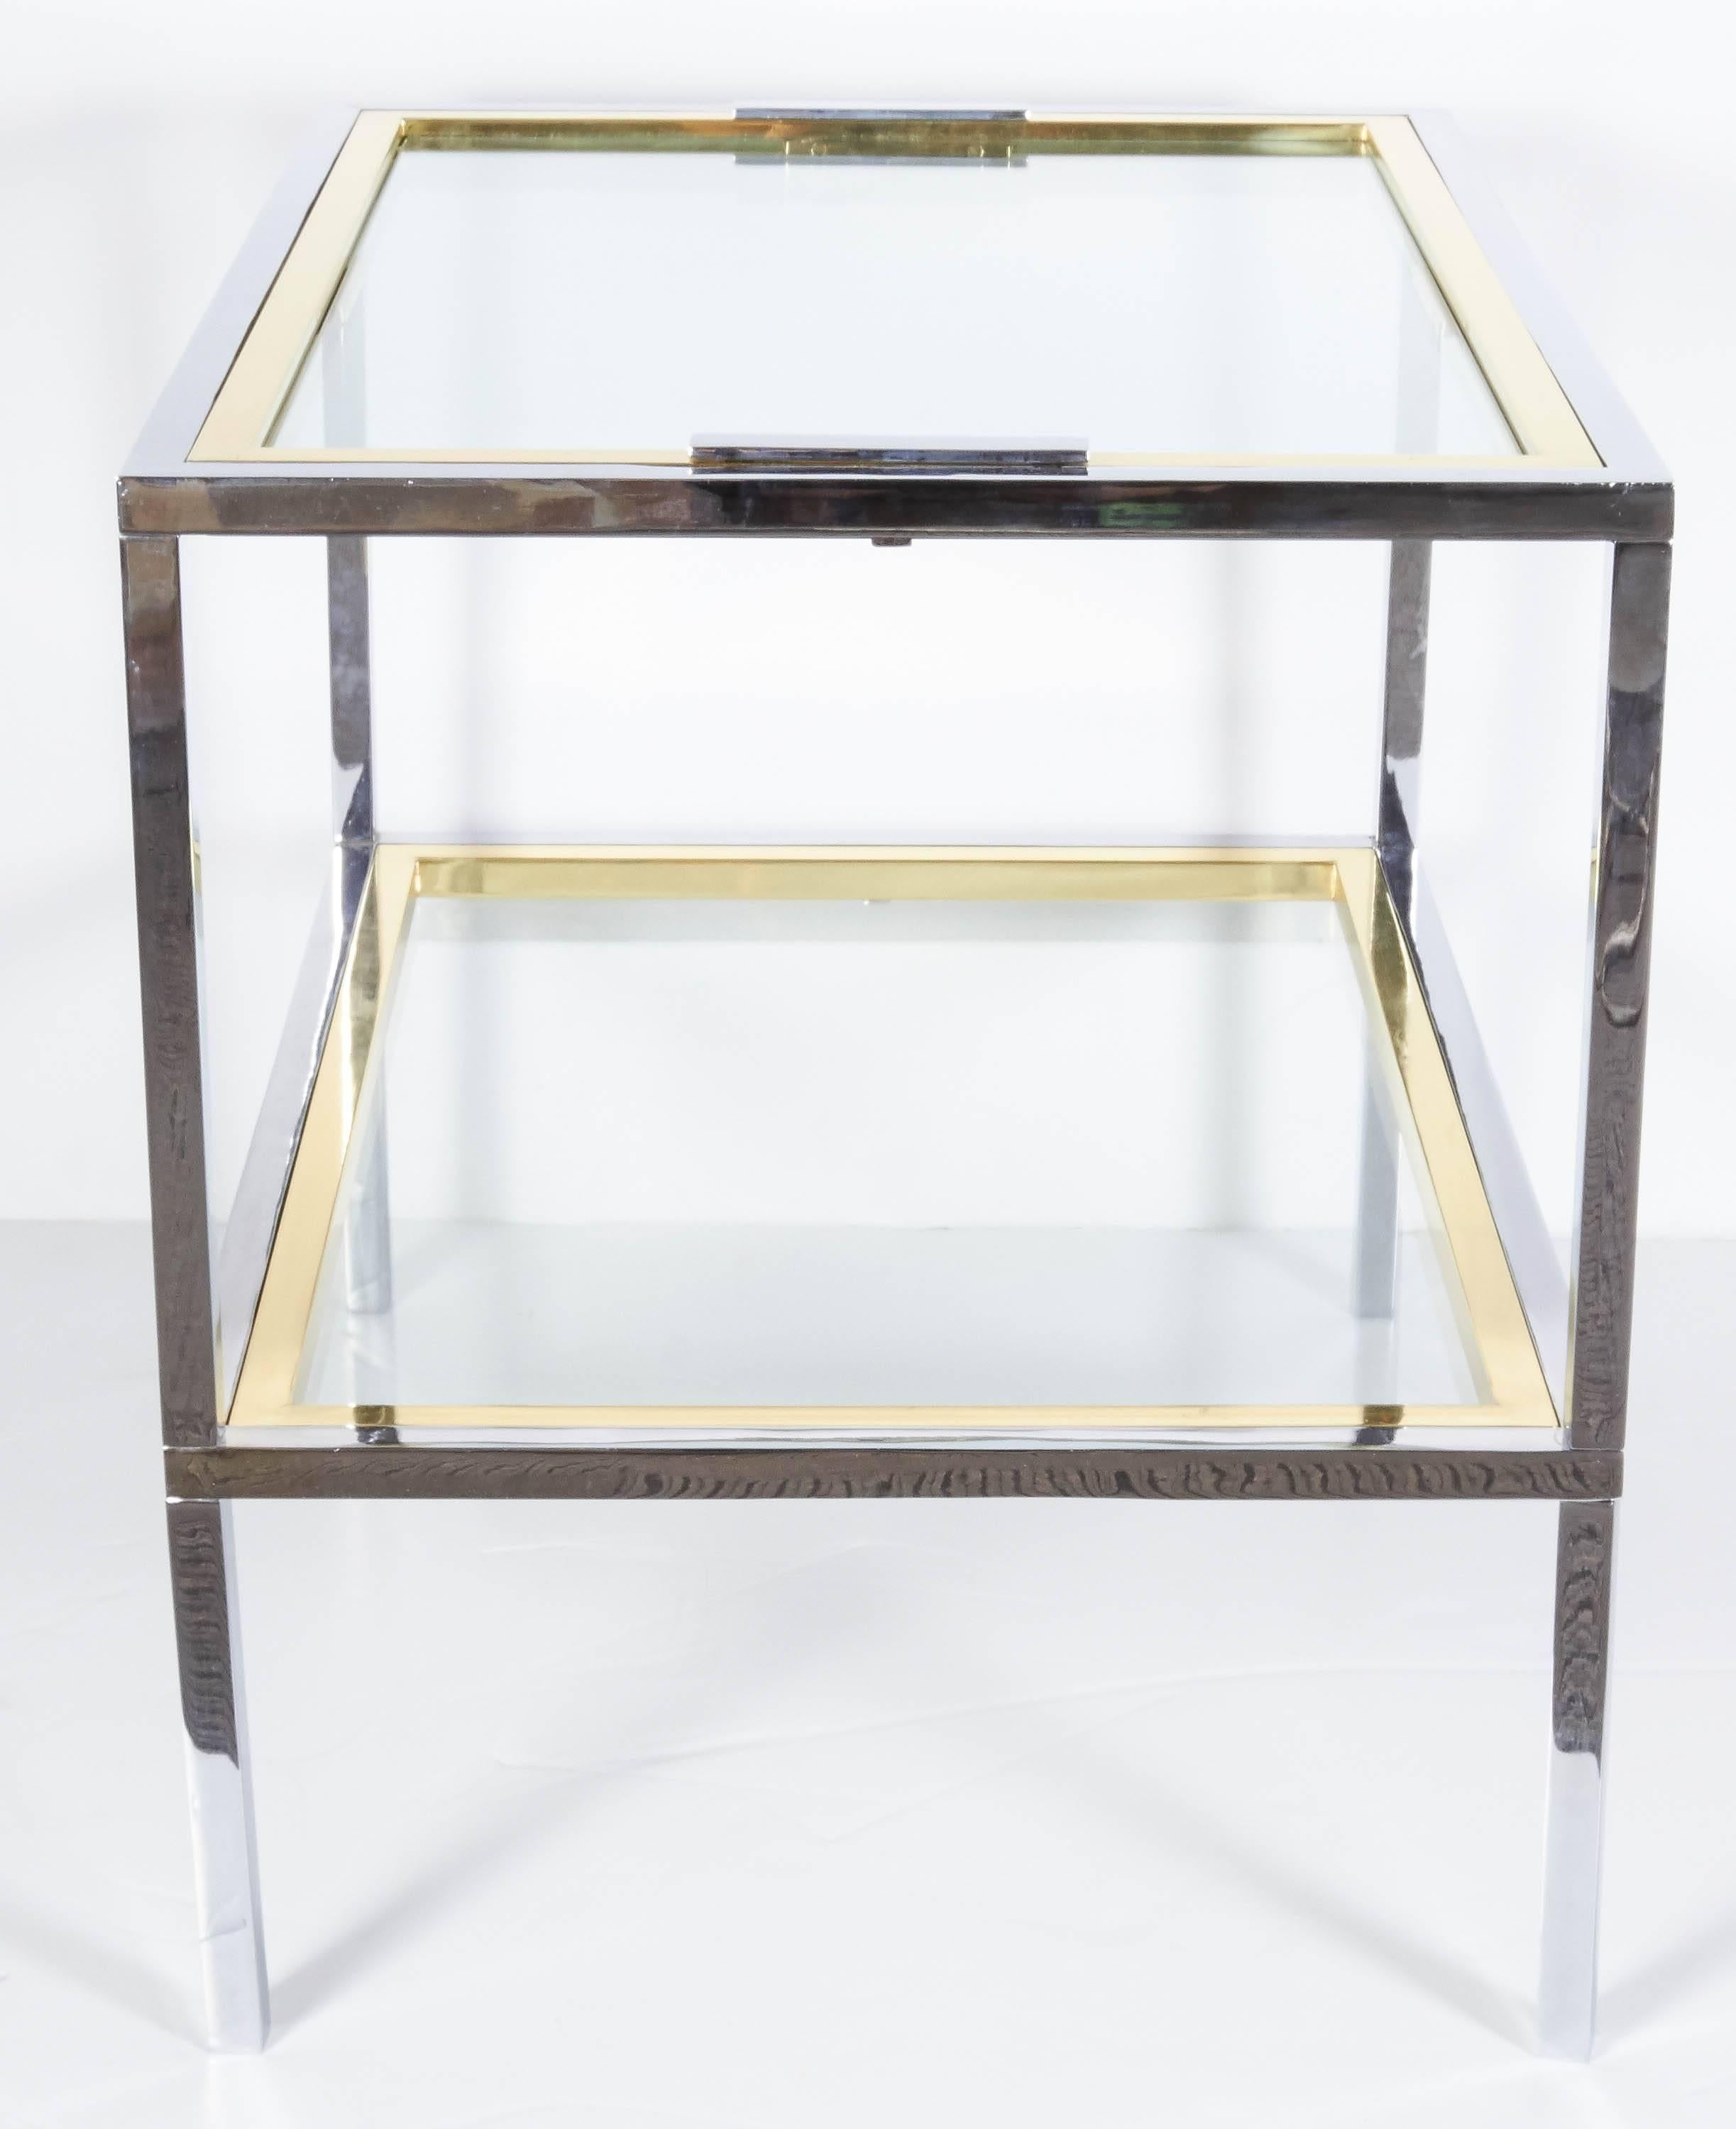 1970s Modern Italian Chrome, Brass and Glass Tray Table For Sale 3